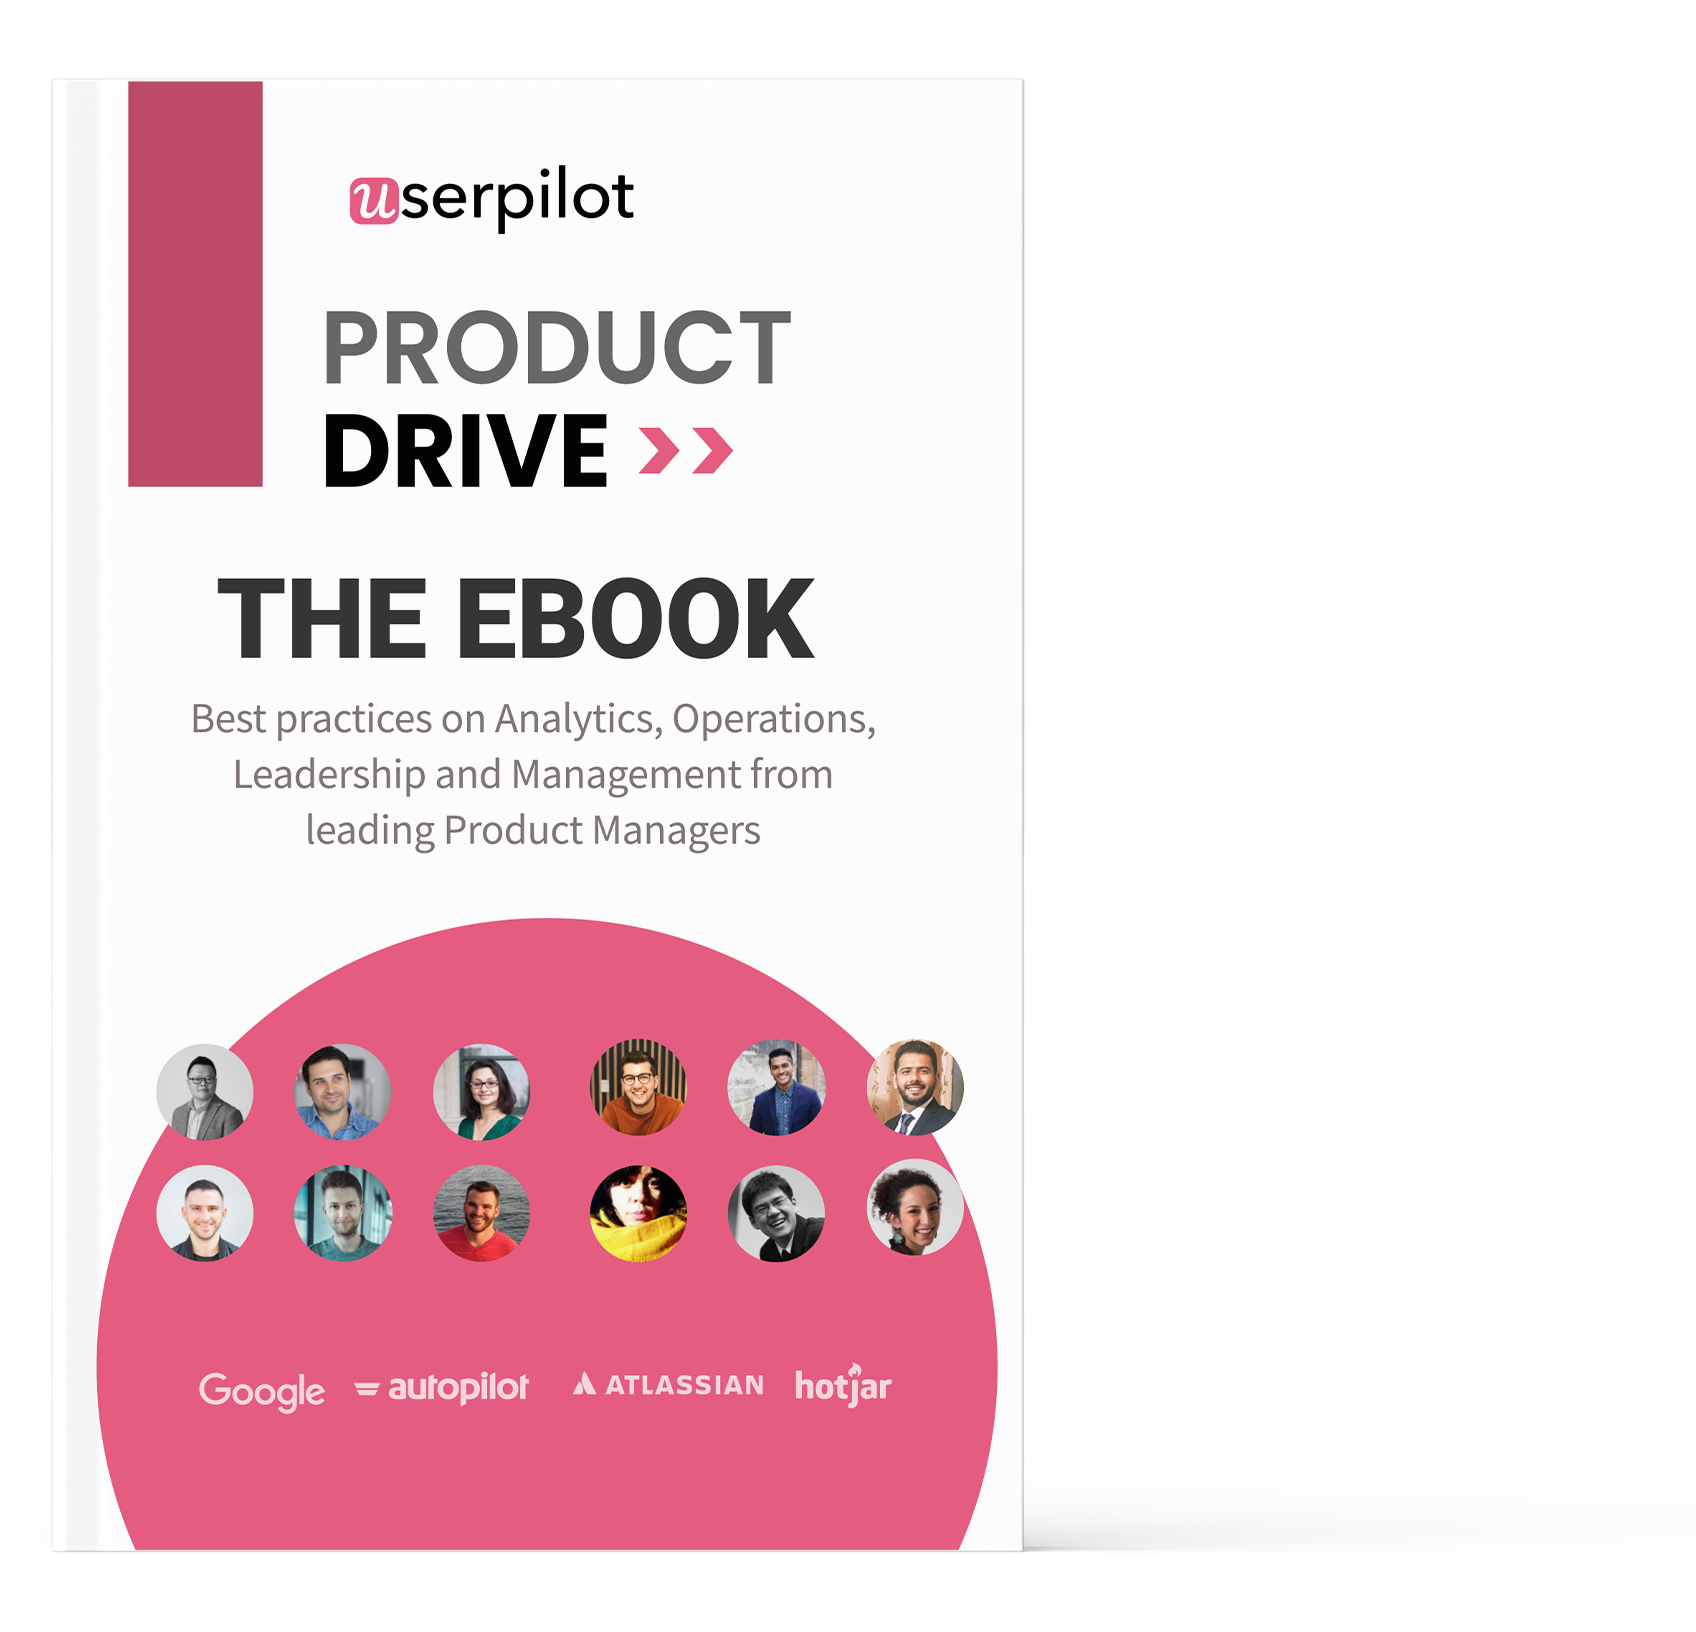 Book_product_drive